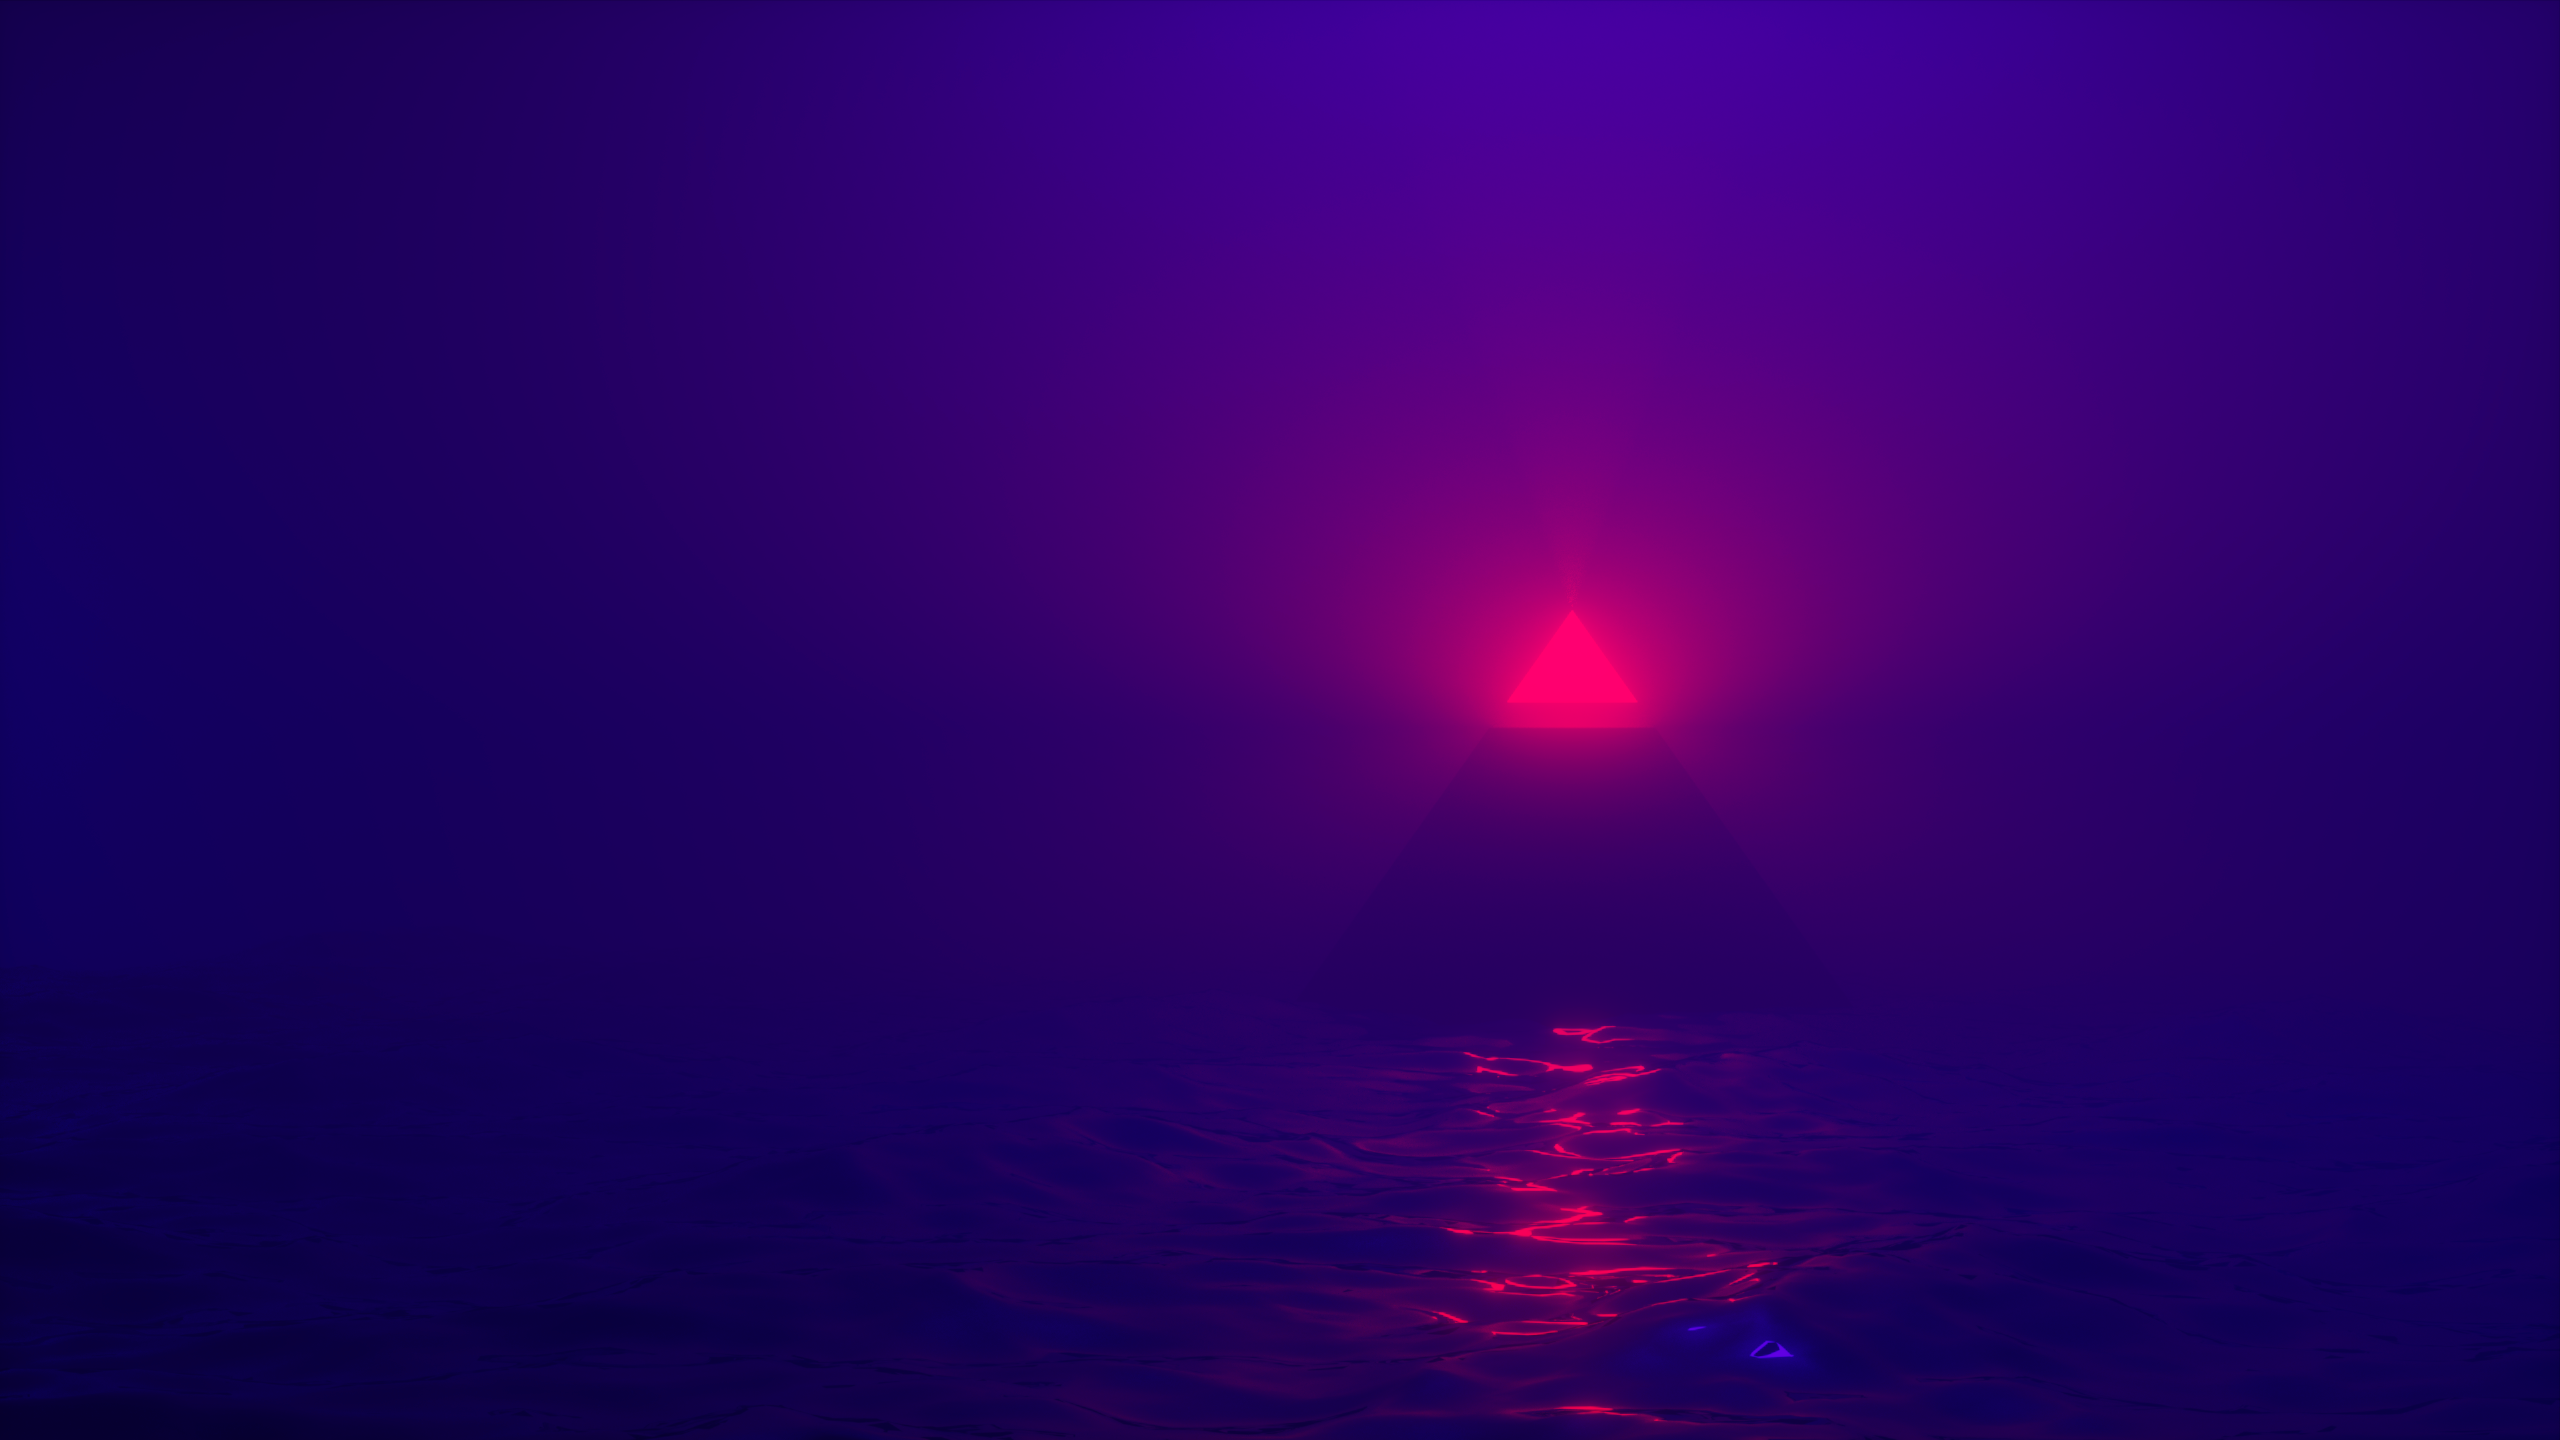 General 2560x1440 pyramid water abstract Blender blue purple red neon geometry light effects